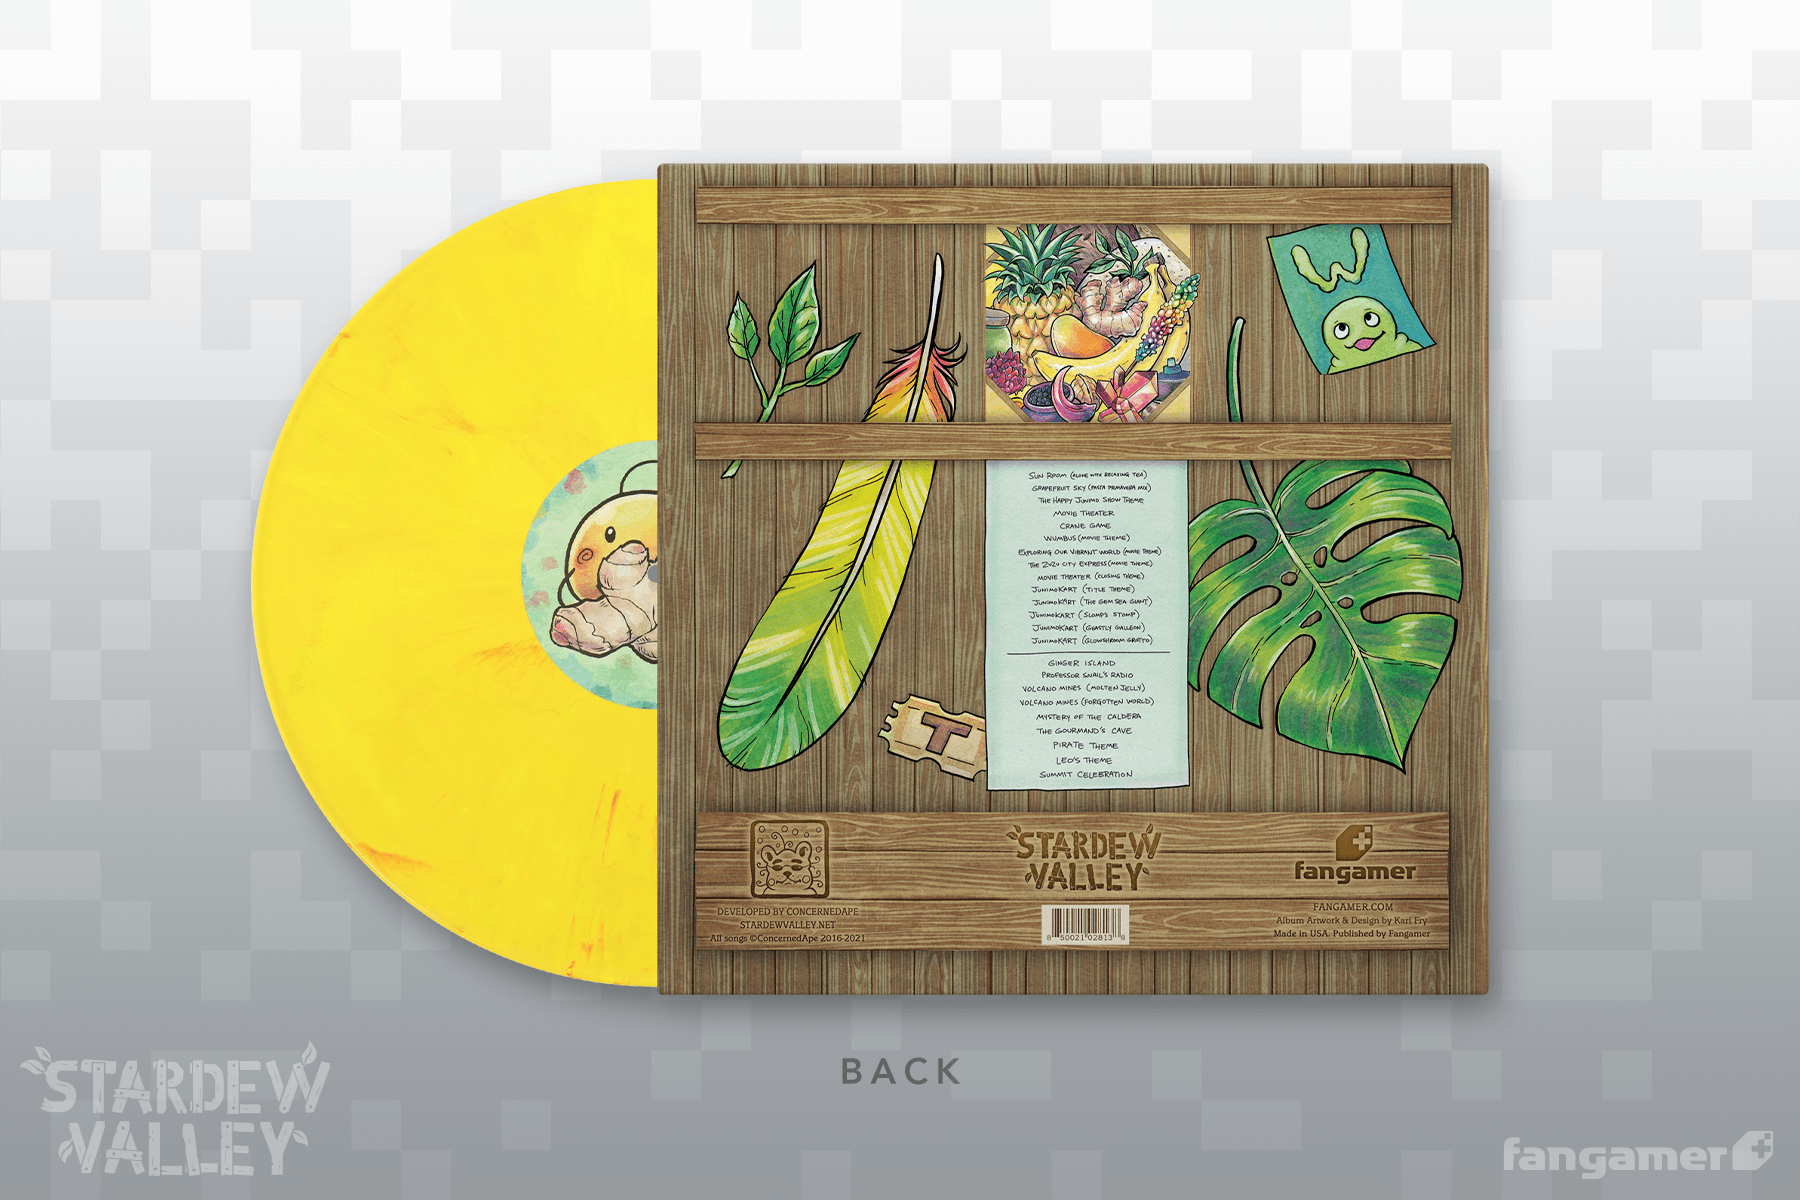 Stardew Valley 1.4/1.5 Single LP Back Cover with Yellow VInyl